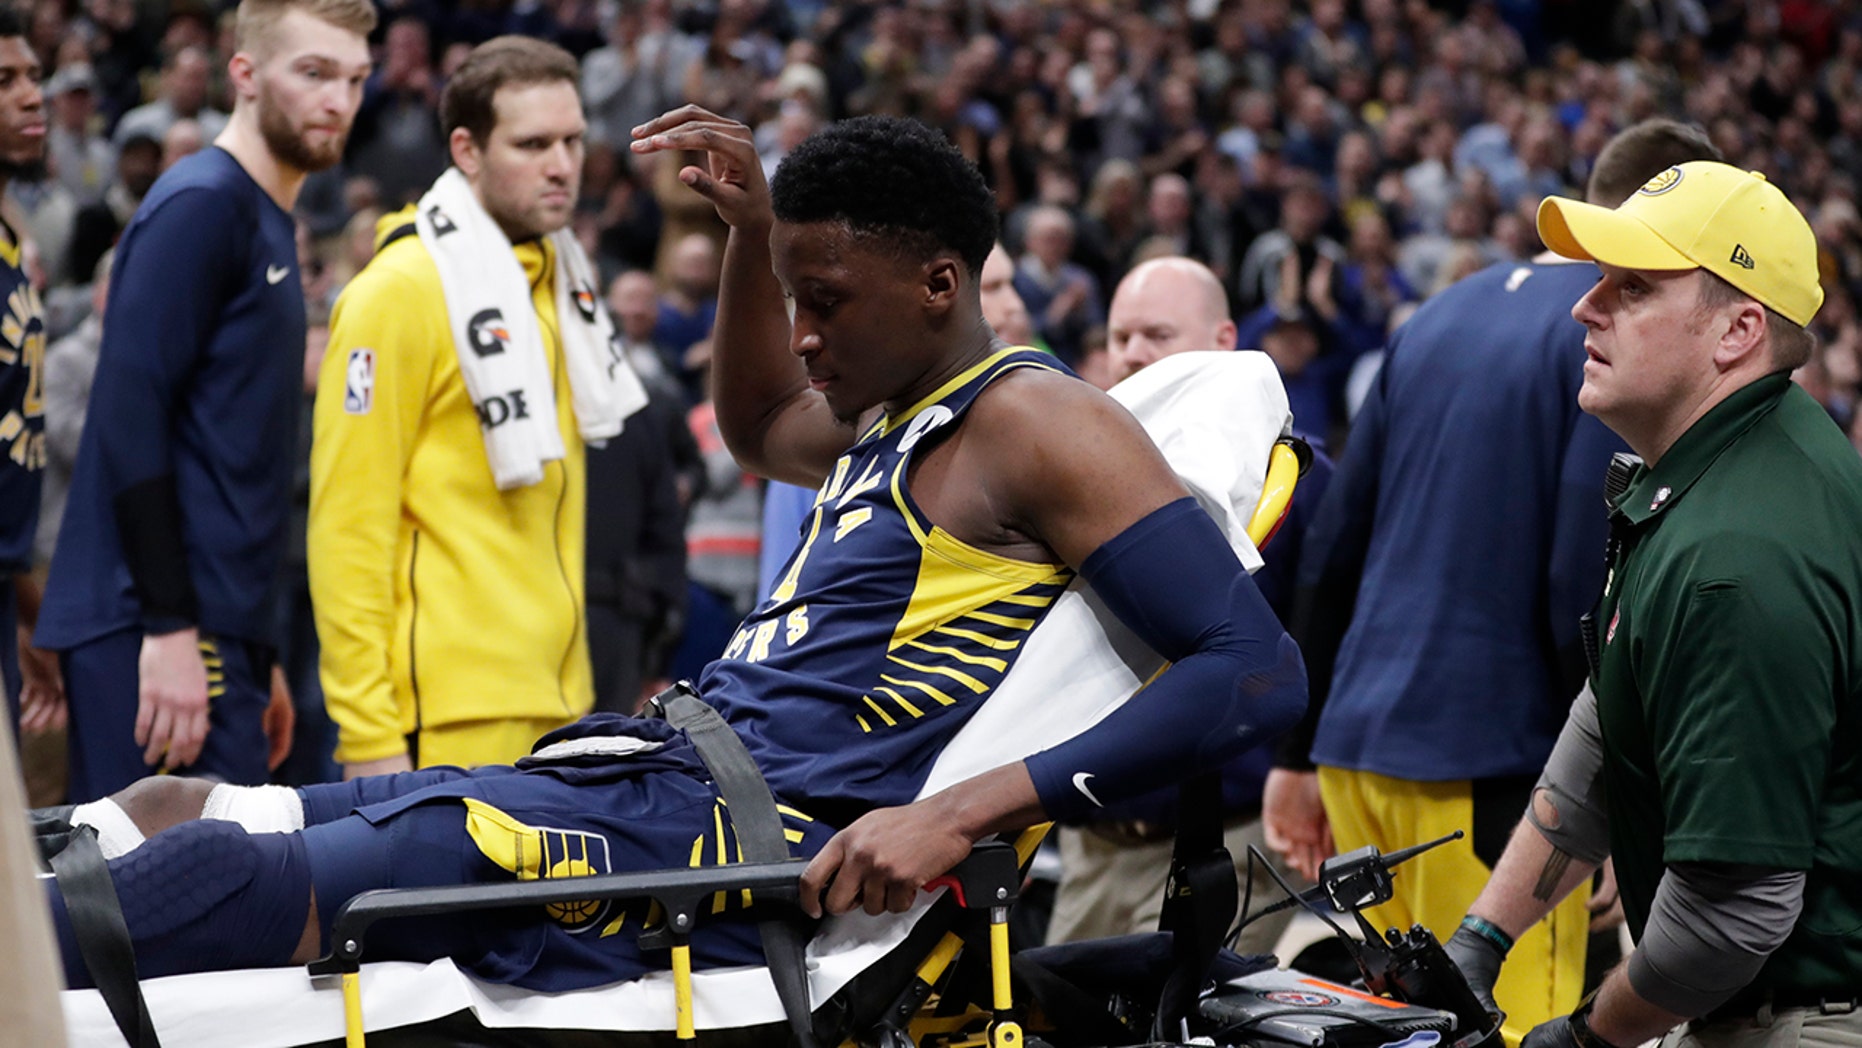 Indiana Pacers star Victor Oladipo suffers serious knee injury during game, leaves court on stretcher